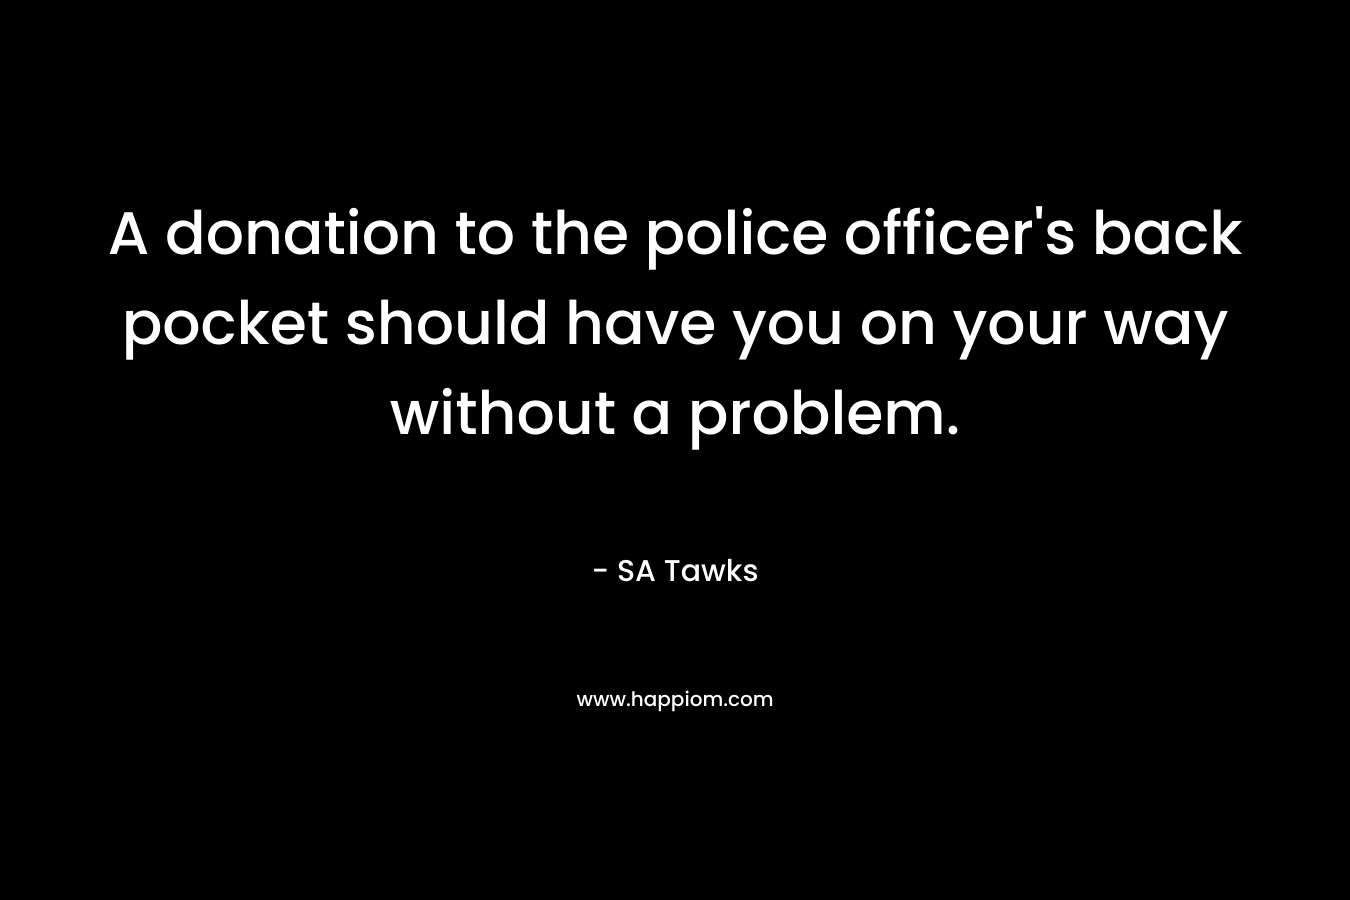 A donation to the police officer’s back pocket should have you on your way without a problem. – SA Tawks